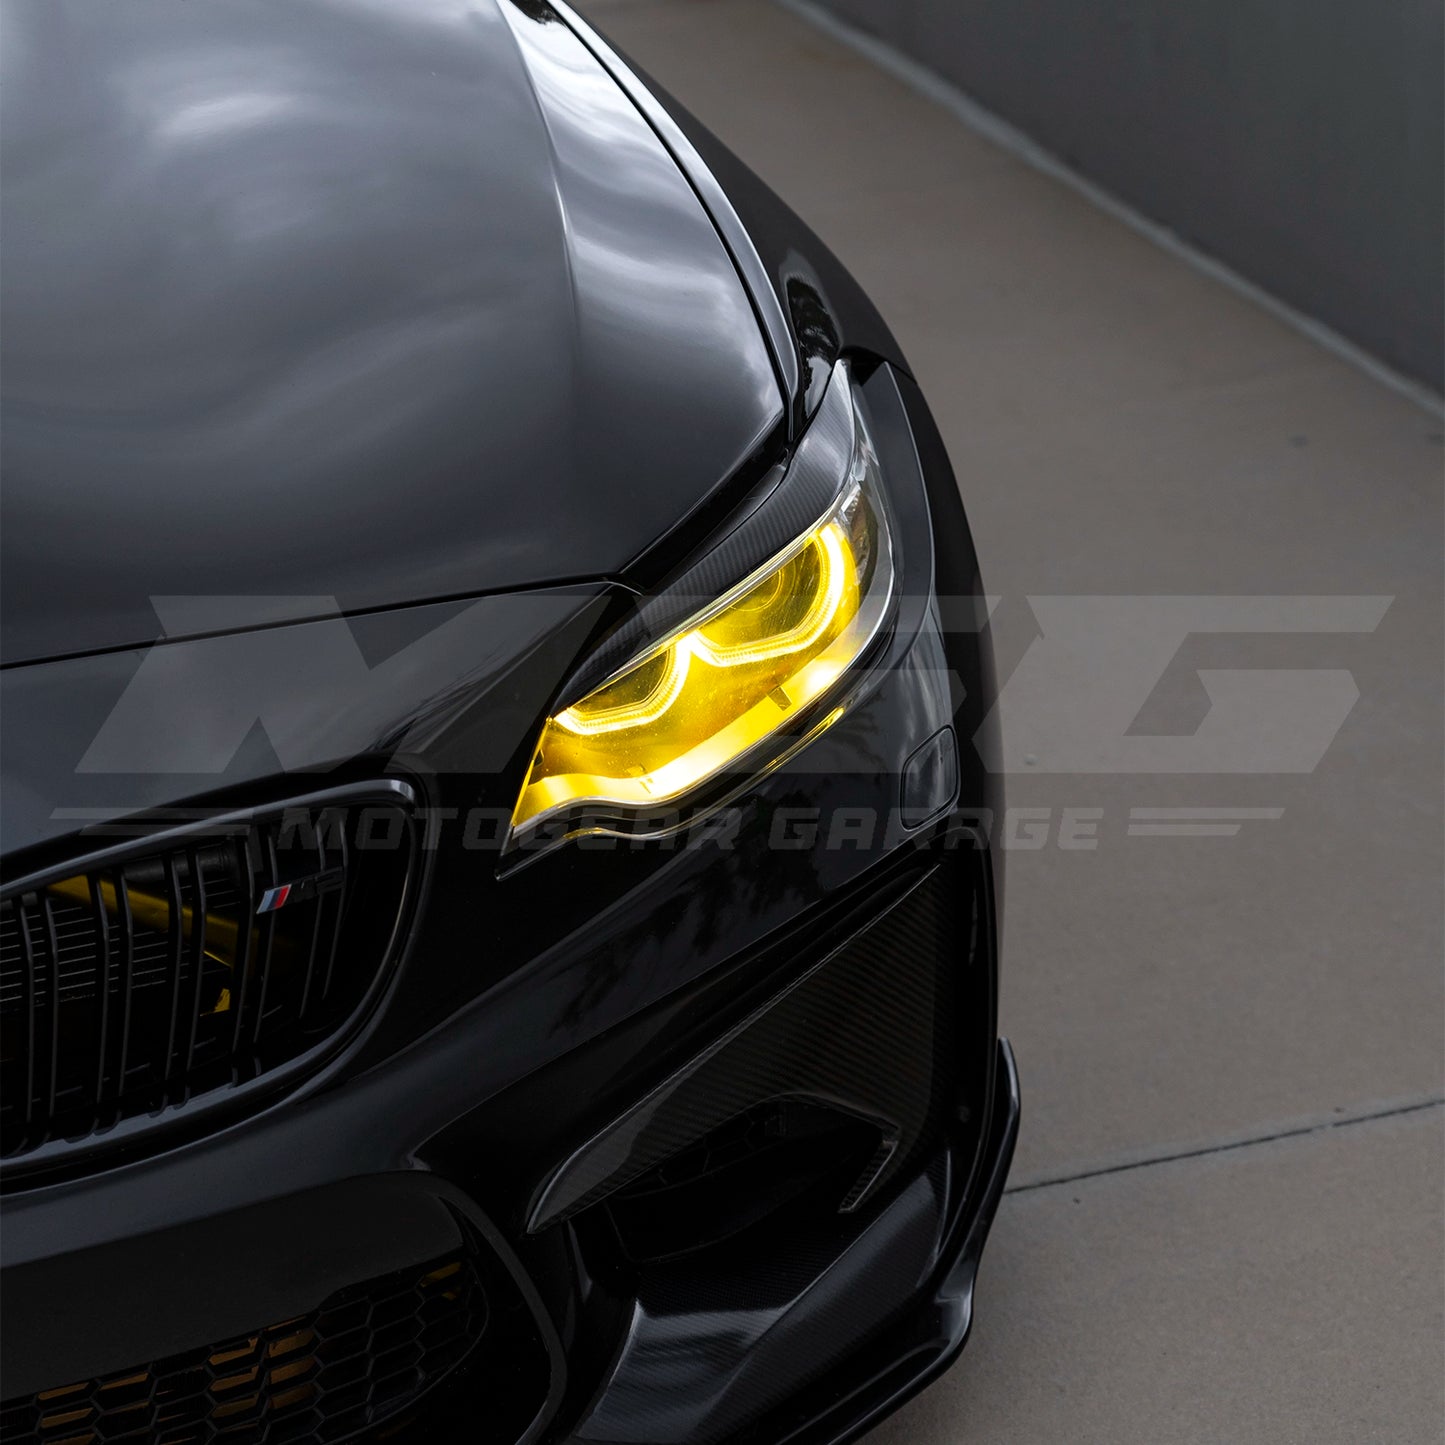 BMW F87 M2 with CSL style yellow DRL LED modules ON.